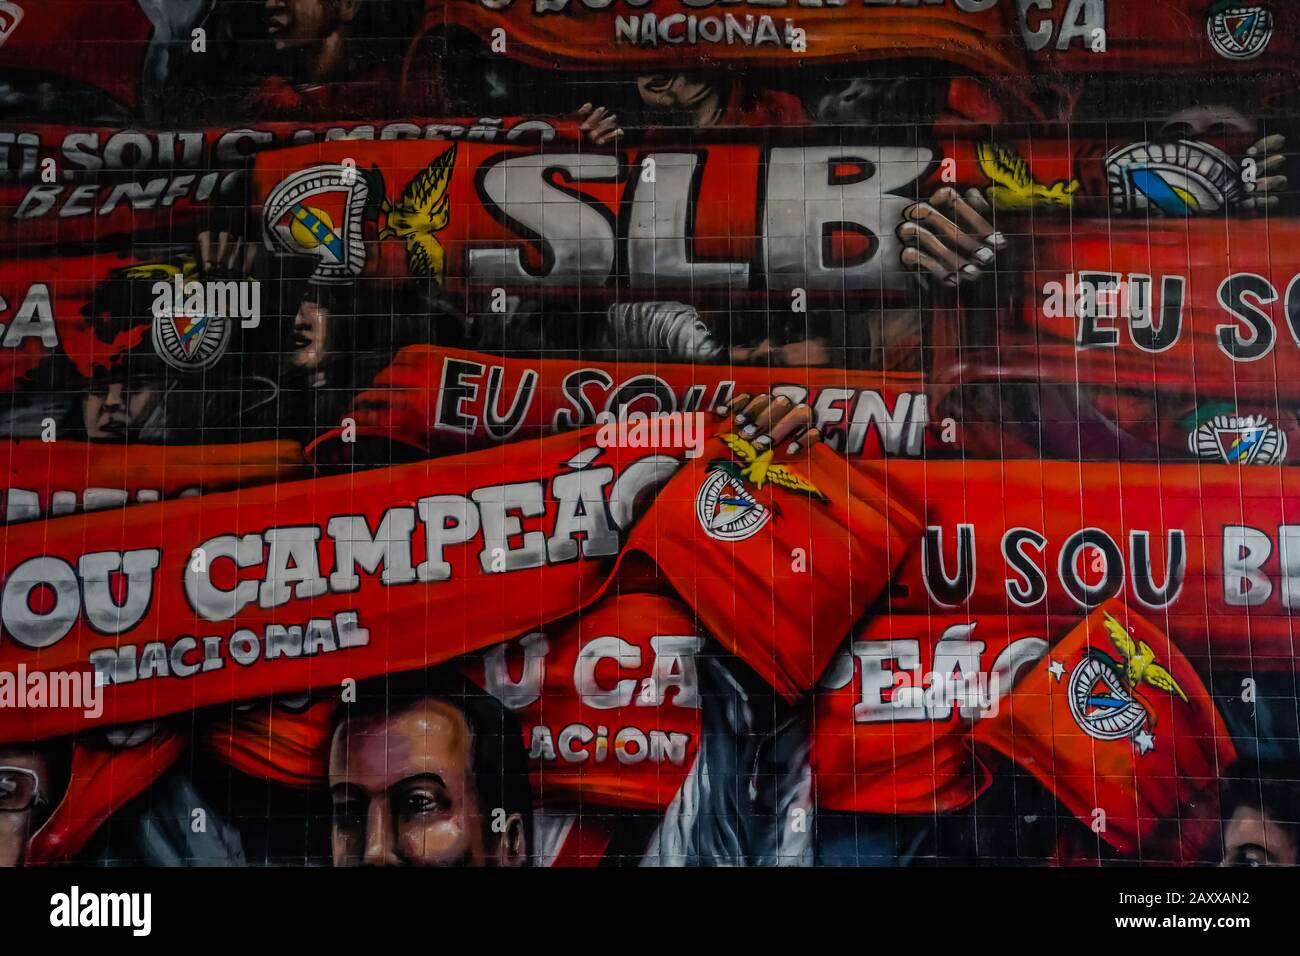 Sport lisboa e benfica hi-res stock photography and images - Alamy